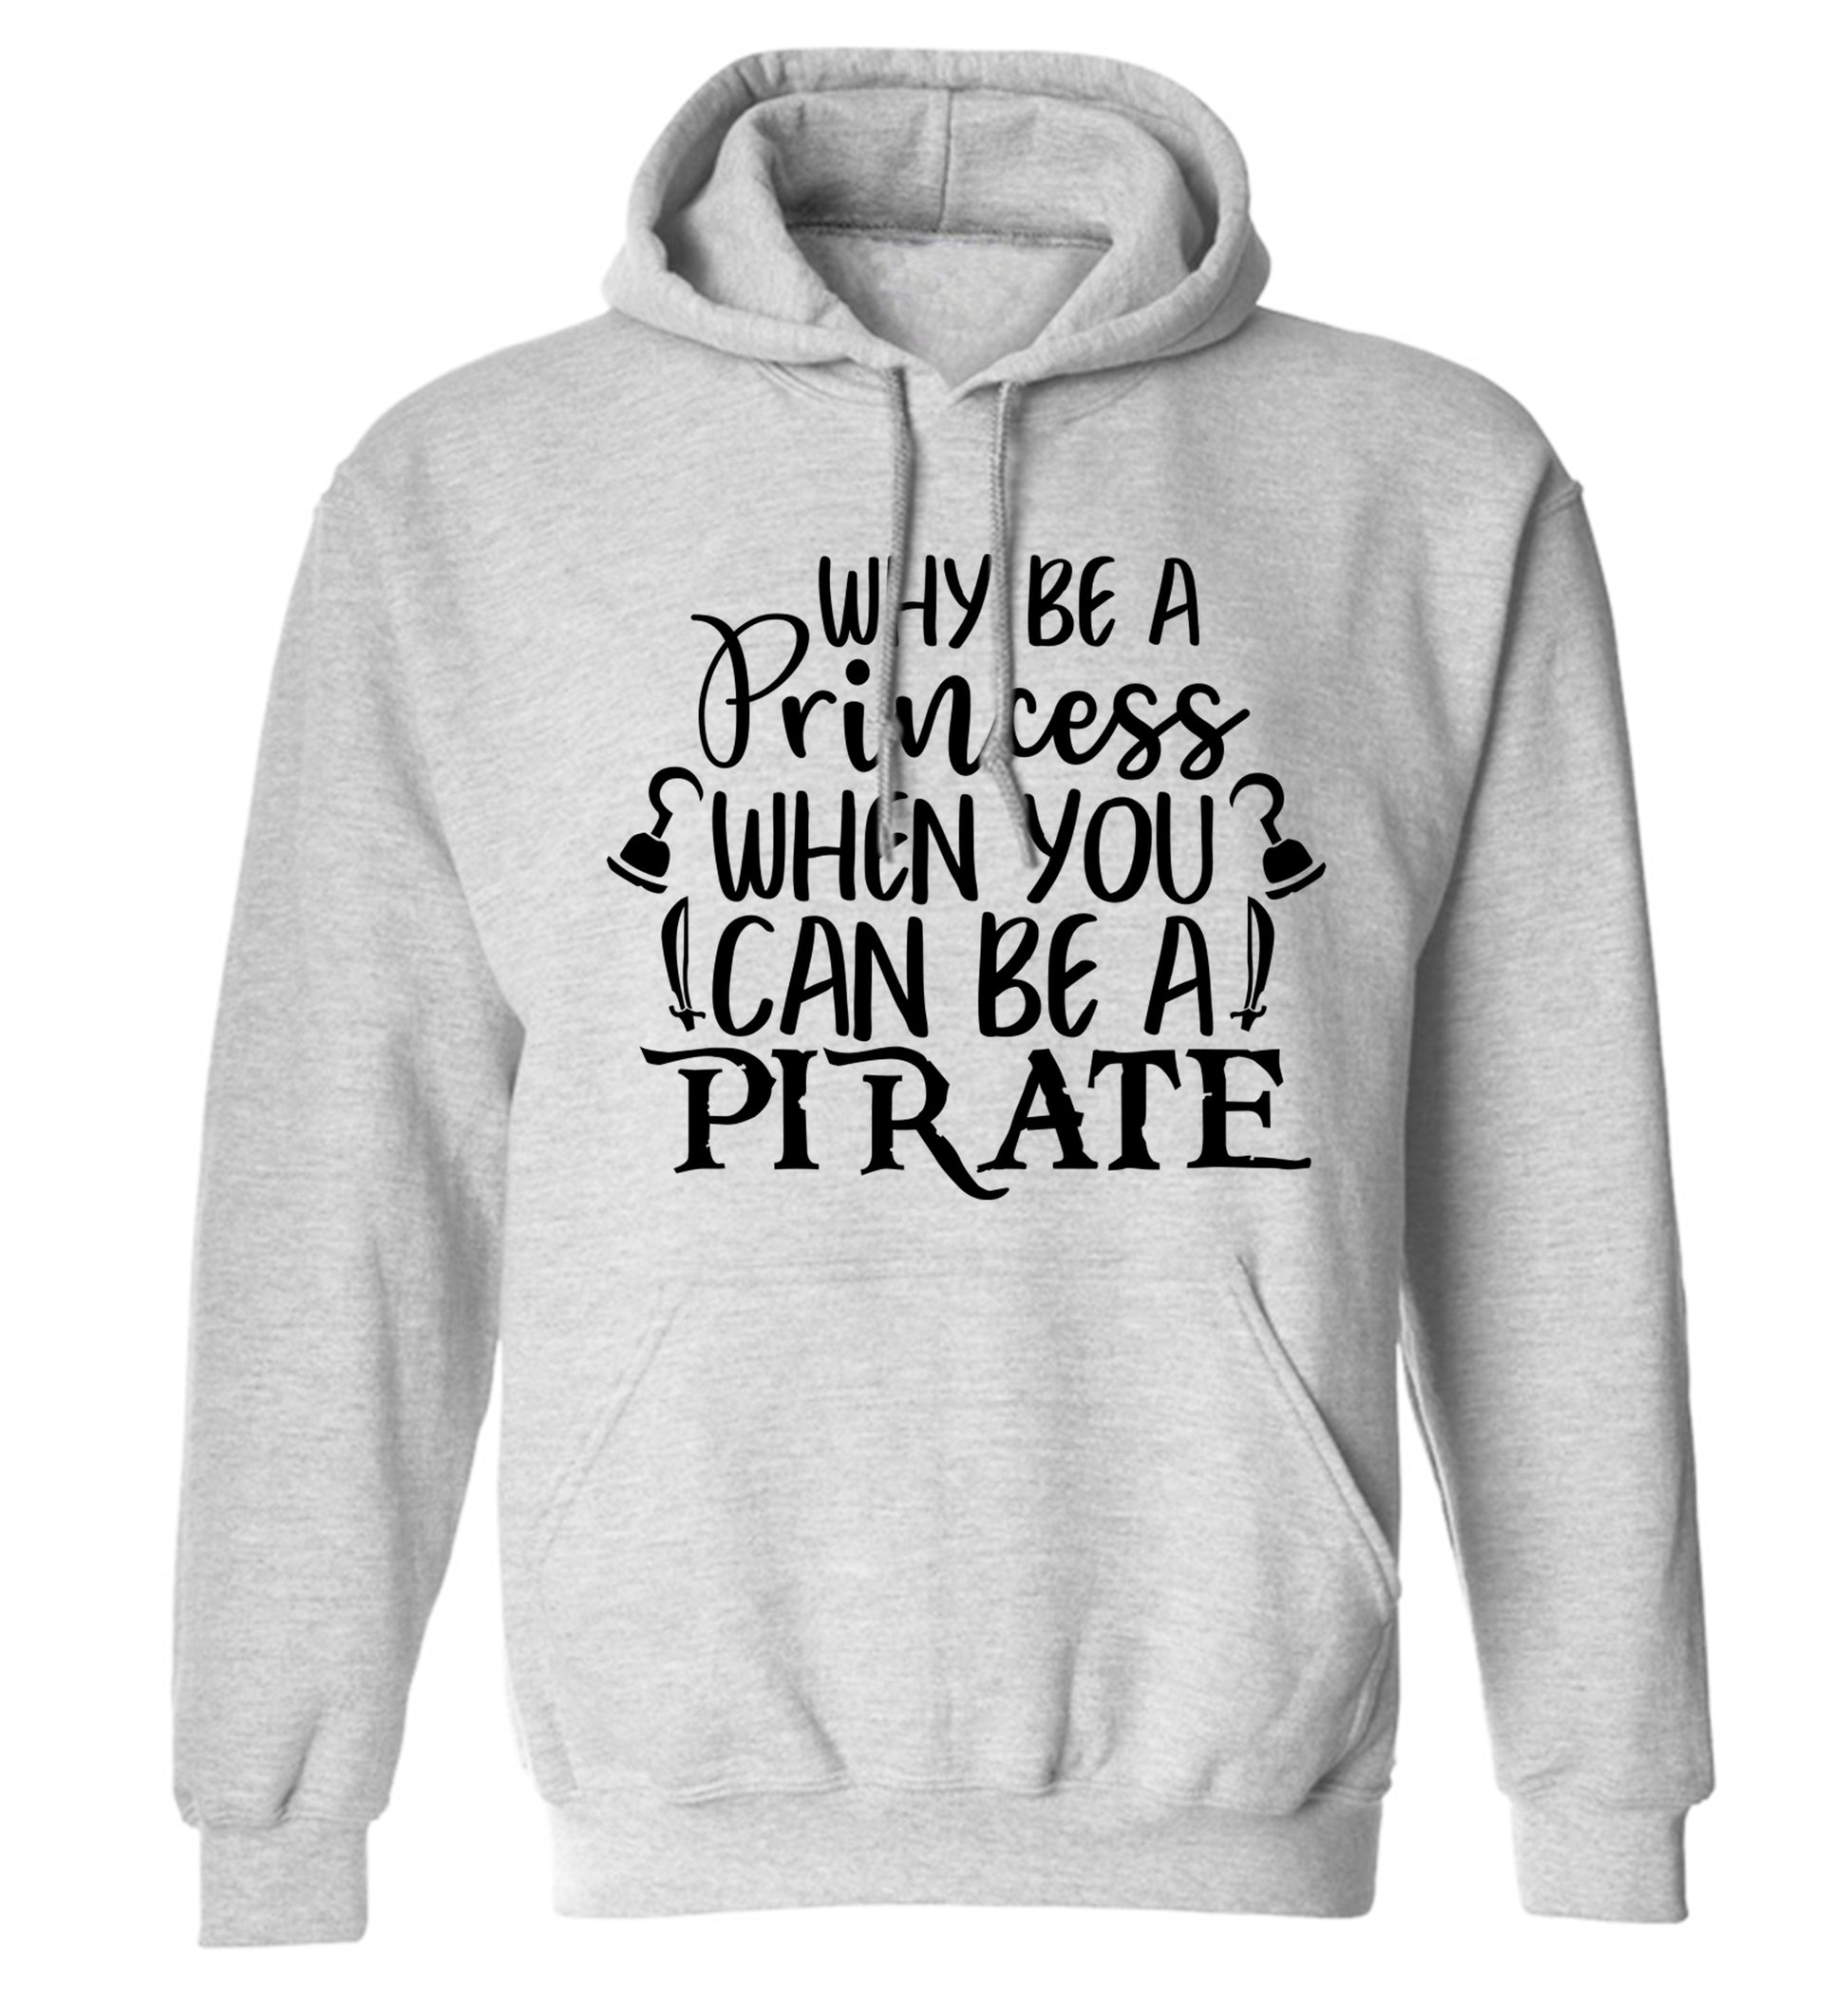 Why be a princess when you can be a pirate? adults unisex grey hoodie 2XL